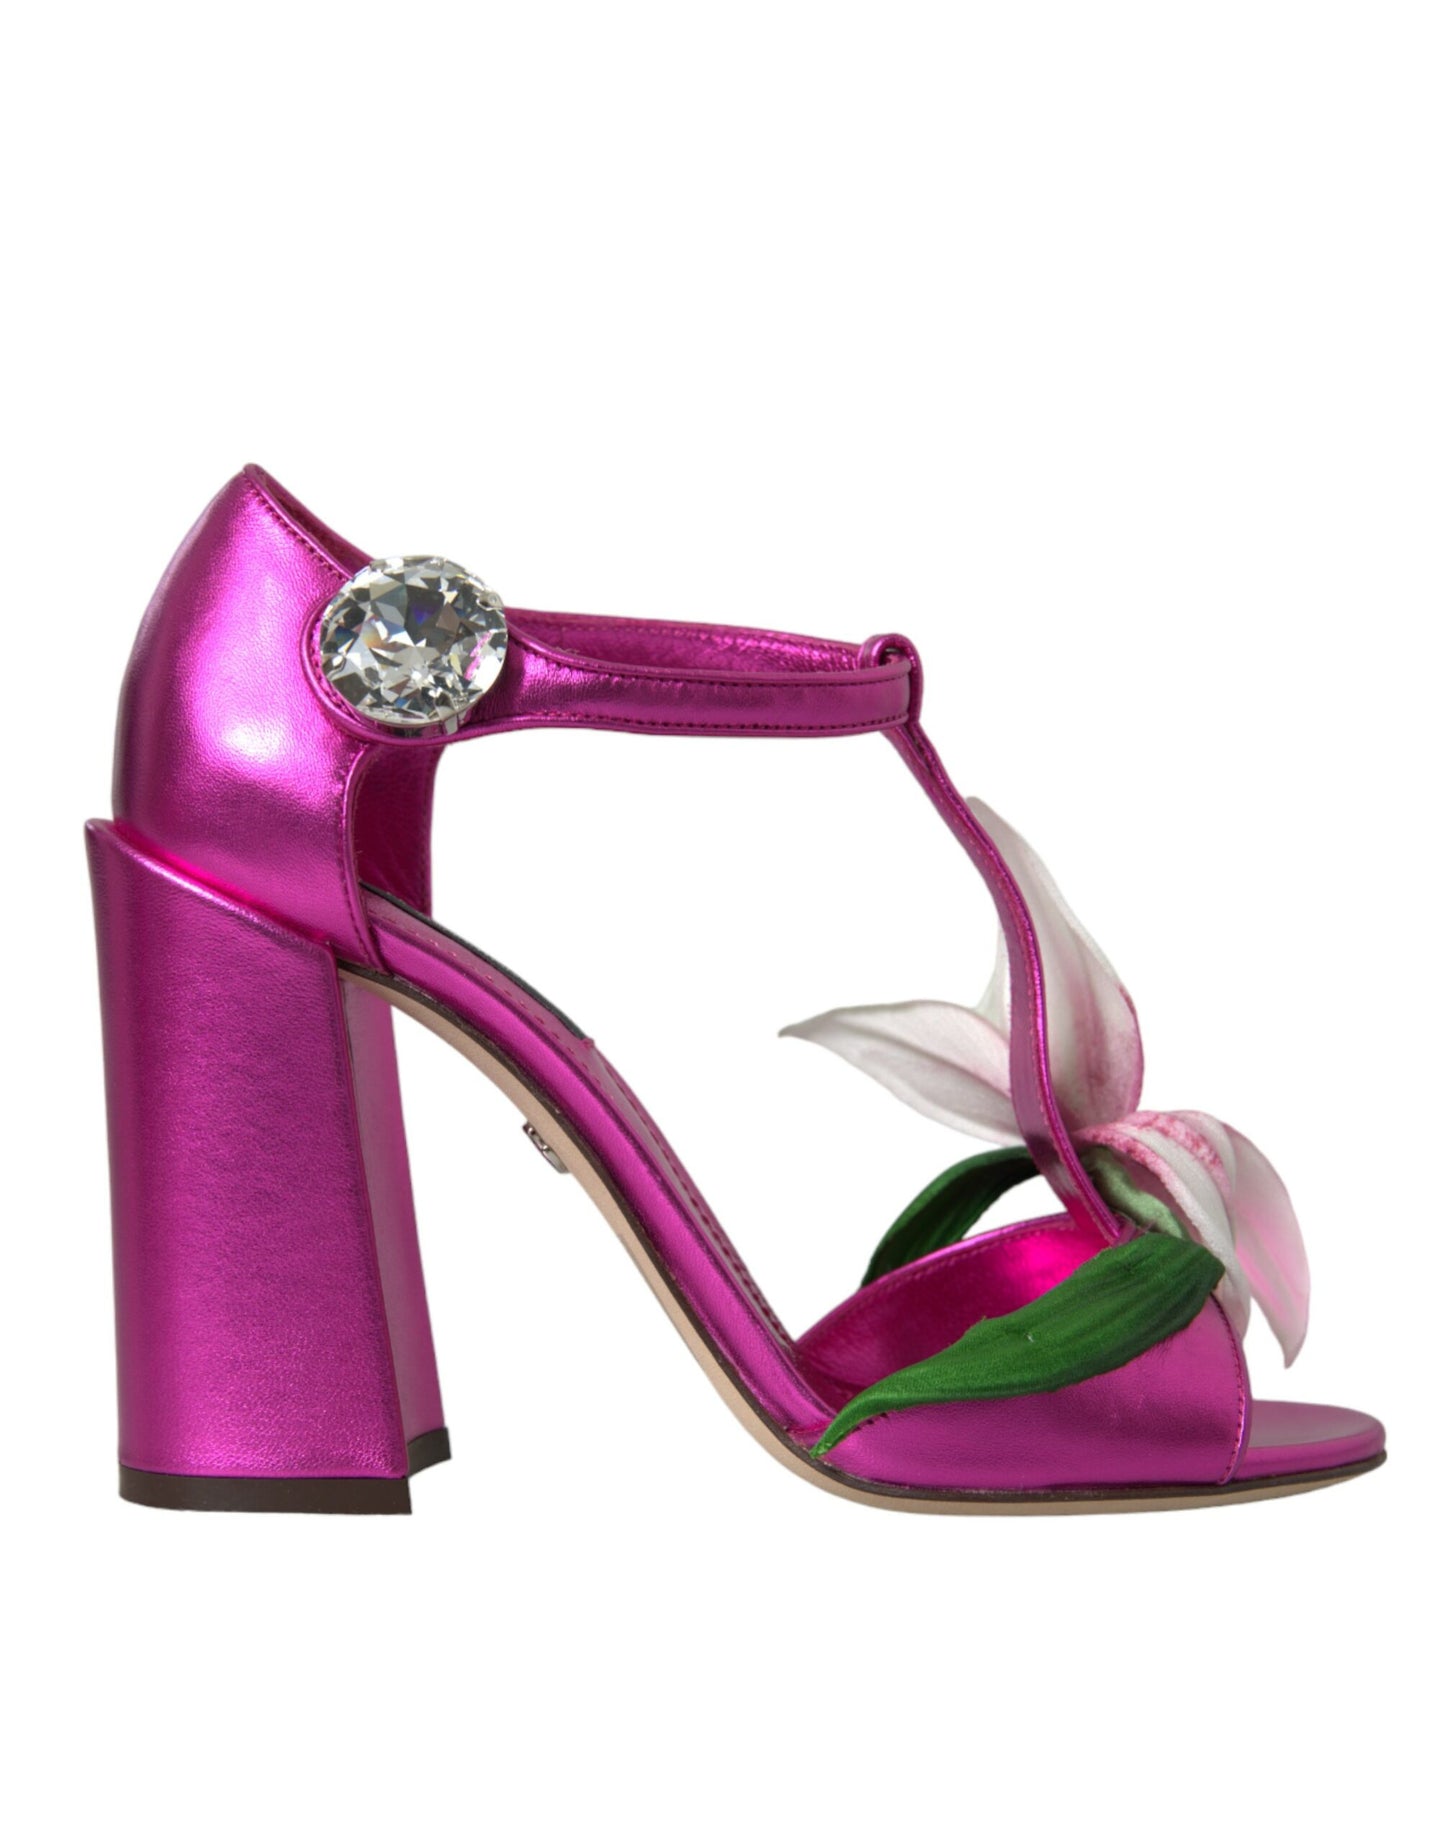 Dolce & Gabbana Pink Leather Crystals Floral Sandals Shoes